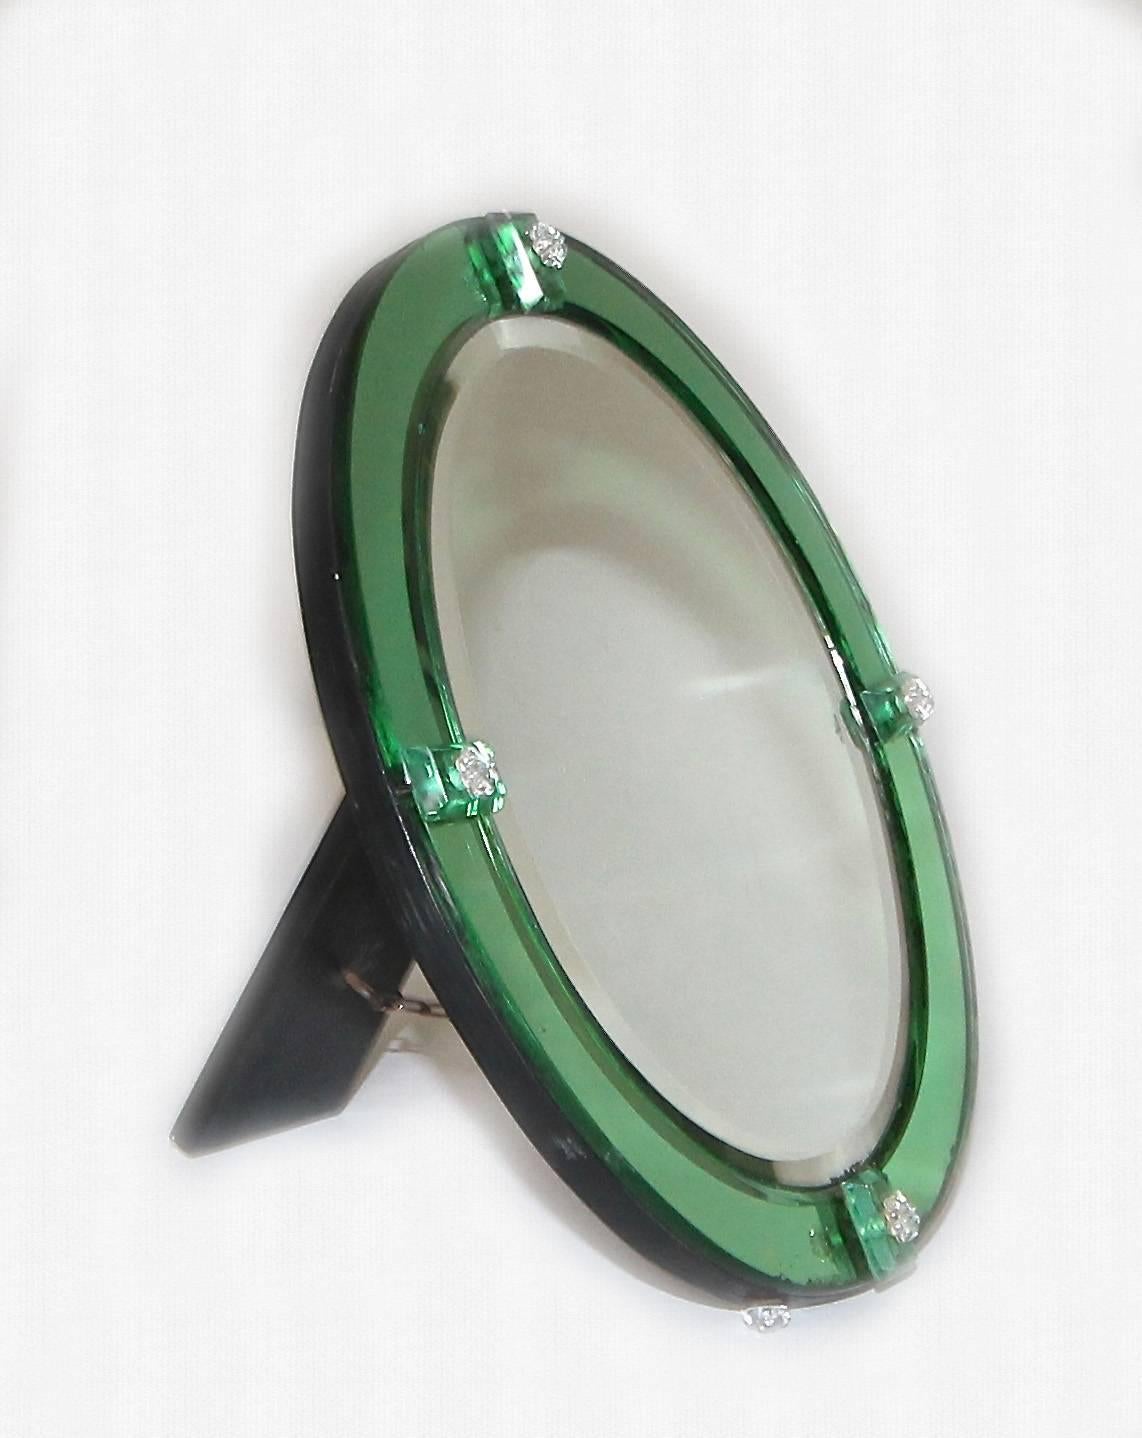 Rare diminutive oval mirror bordered with emerald green mirrored glass panels. Glass panels are held in place with decorative blown glass pins. Black painted wood backing and easel Stand held with brass chain.